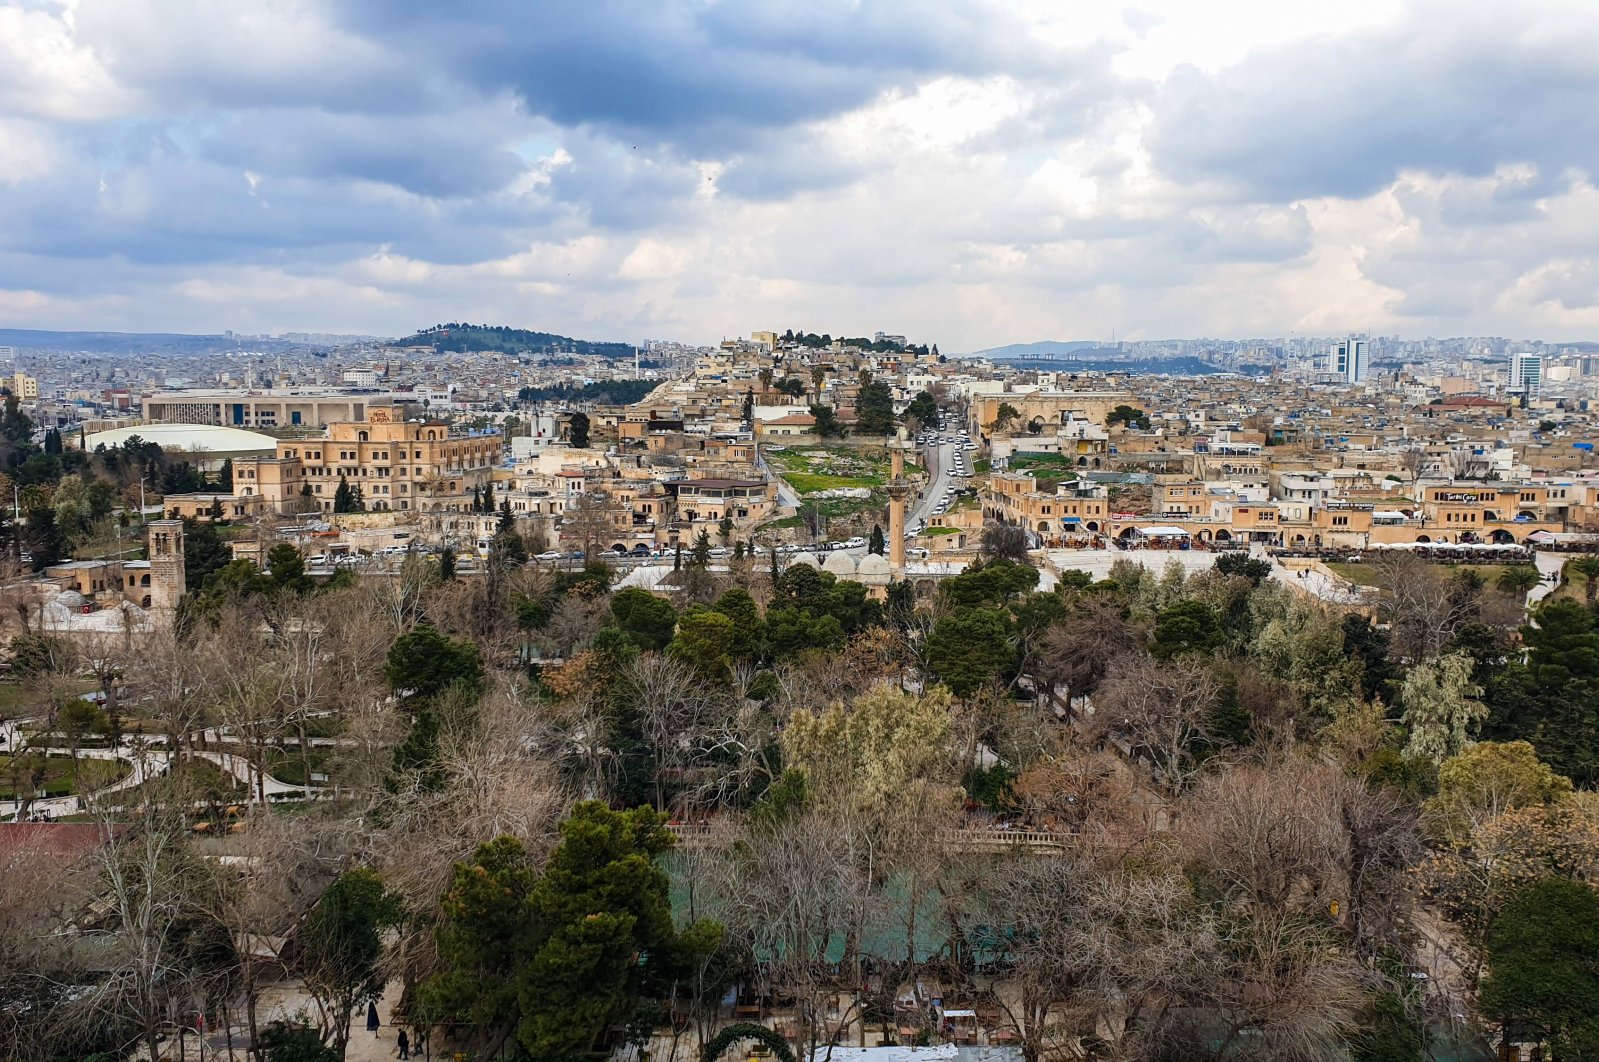 A view of the city of Şanlıurfa high up from the castle walls. (Photo by Argun Konuk)